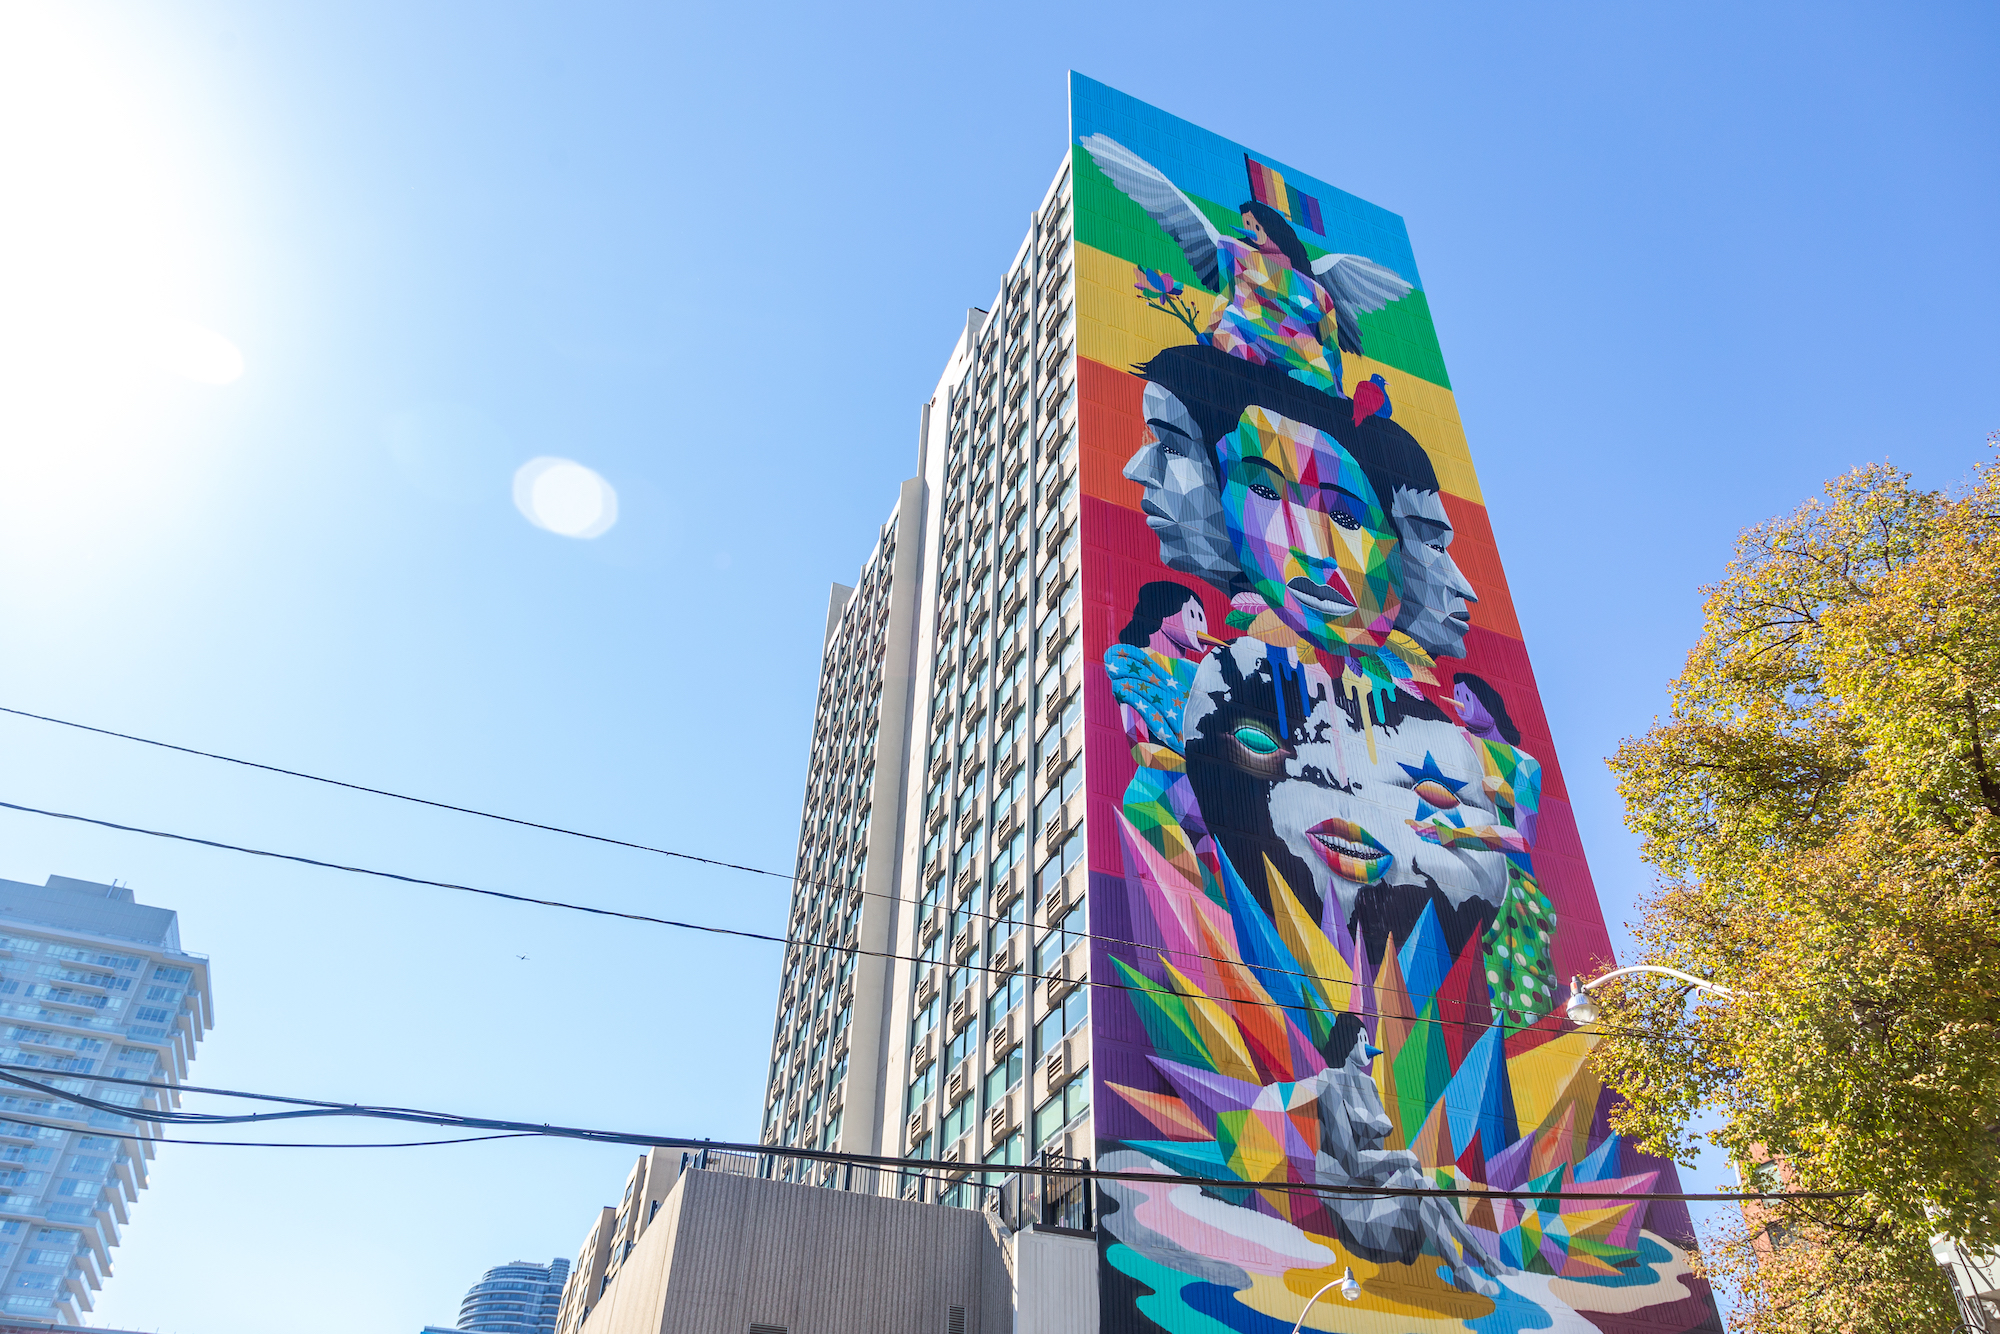 A large 23-storey mural by Okuda San Miguel called Equilibrium Mural in Toronto. Each section is a different colour of the rainbow with geometric imagery of the pride flag, diverse faces,